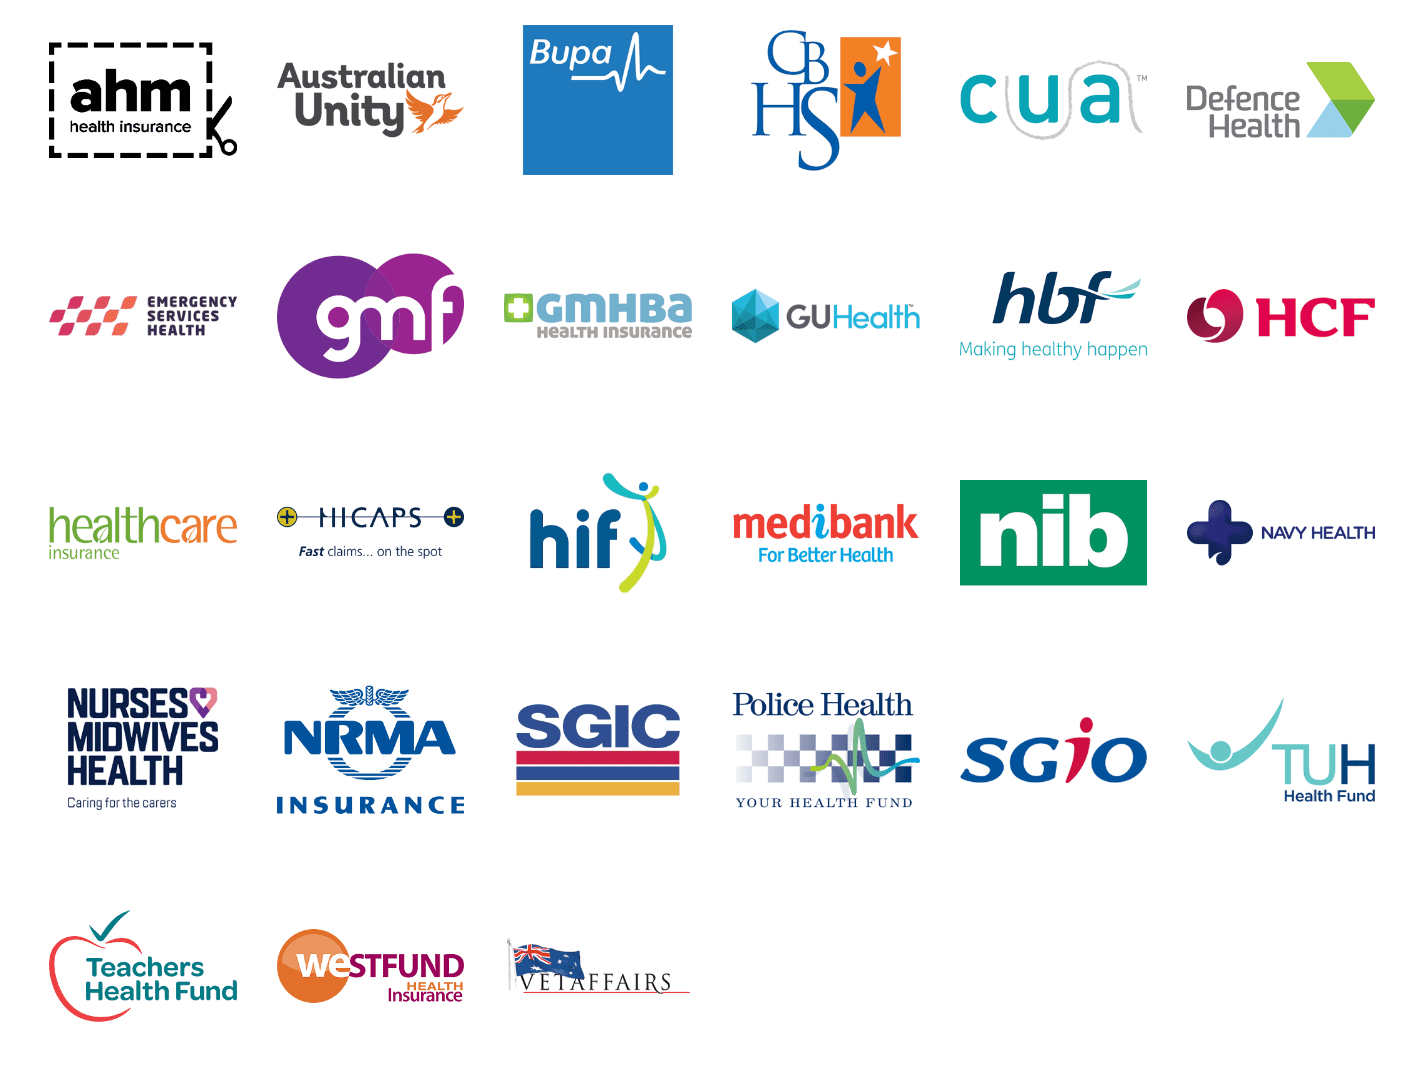 Image of all health fund providers that we can claim on the spot with our HICAPS terminal